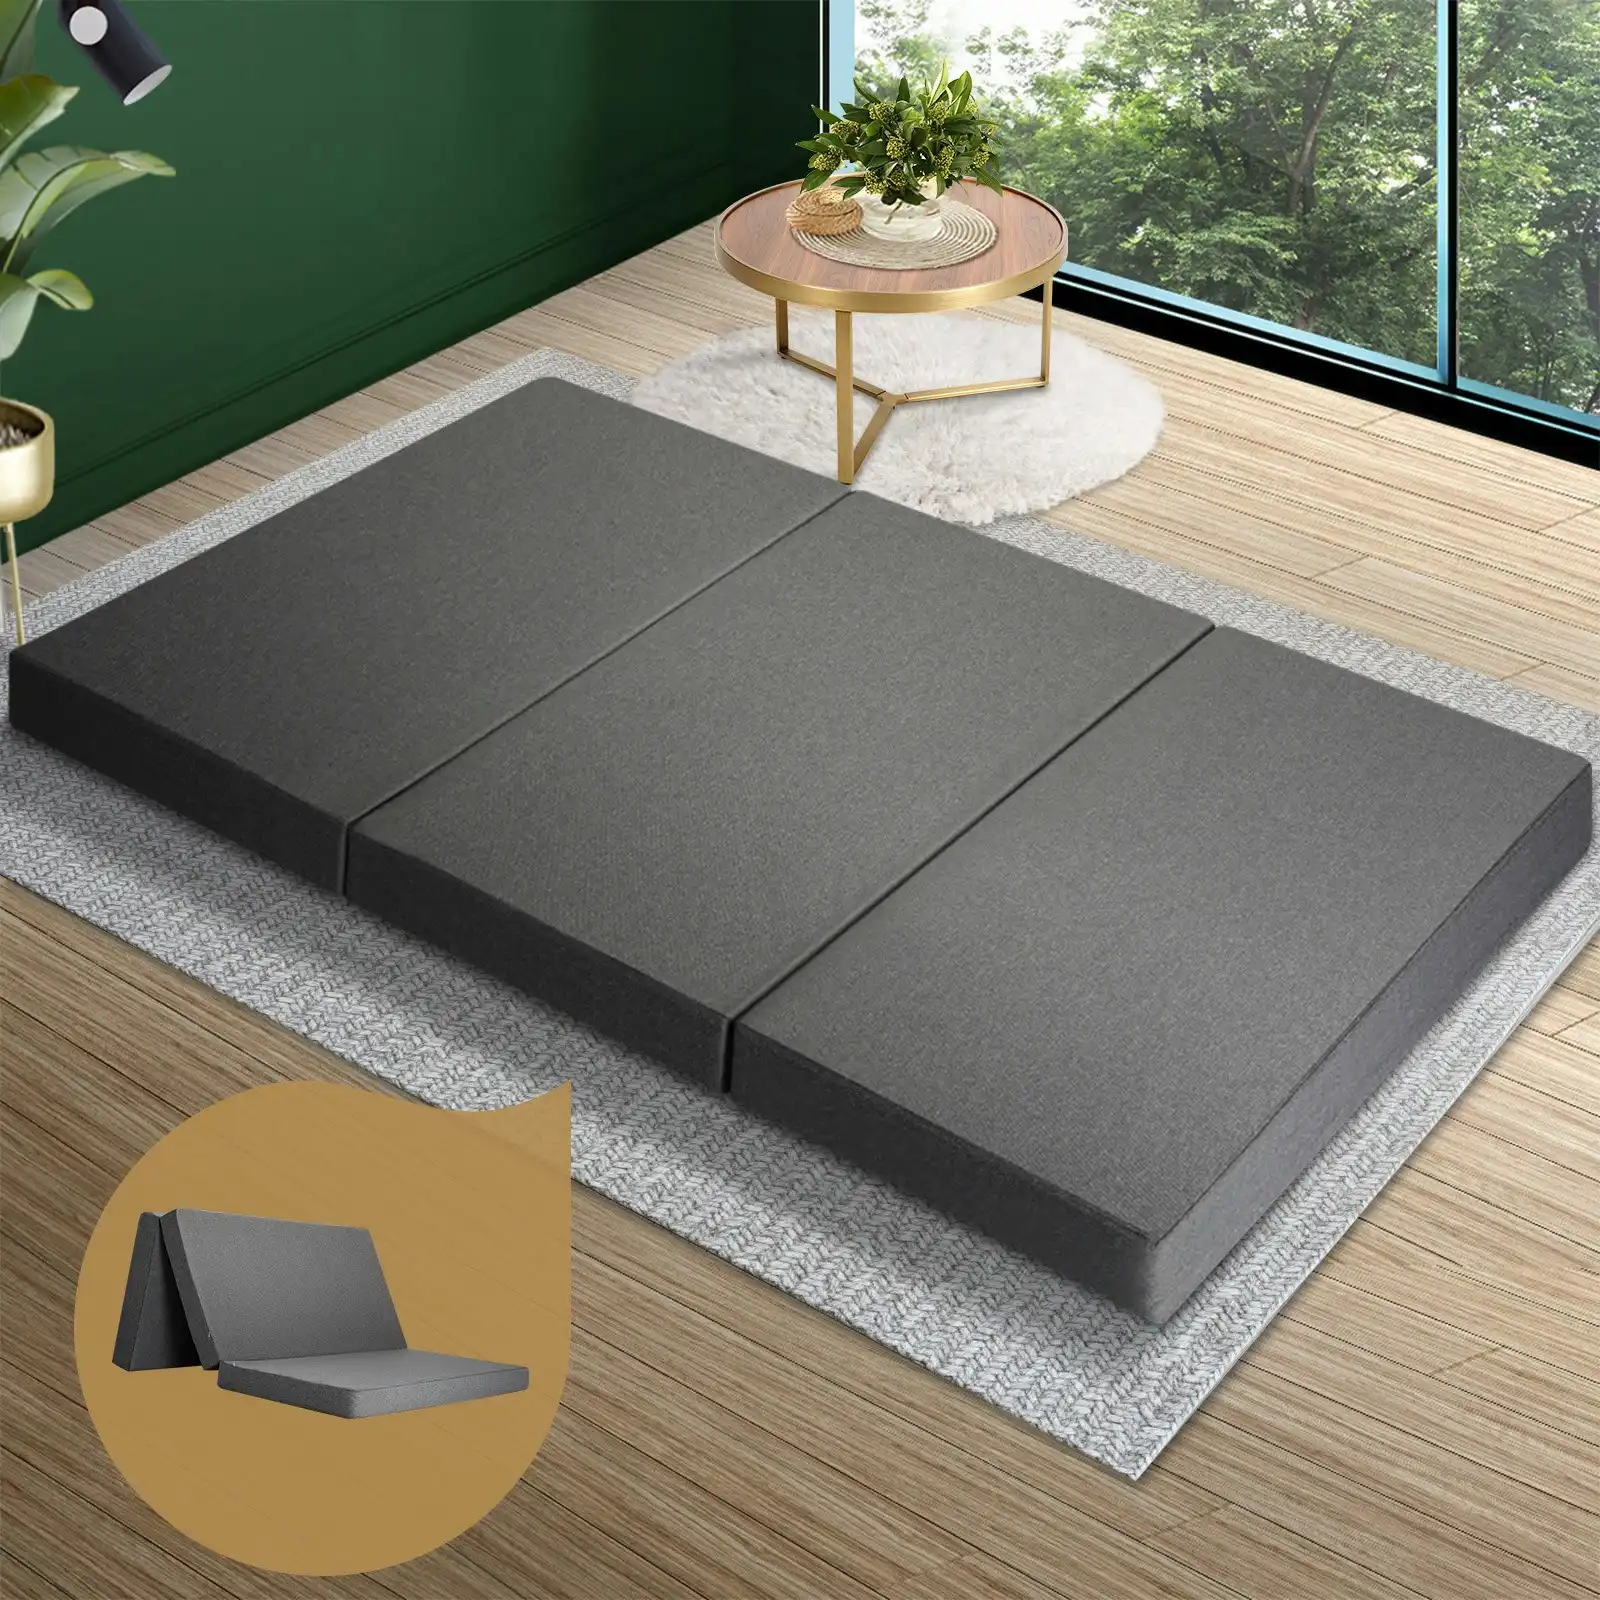 Bedra Foldable Mattress Trifold Camping Bed Sofa Cushion Mat Breathable Double